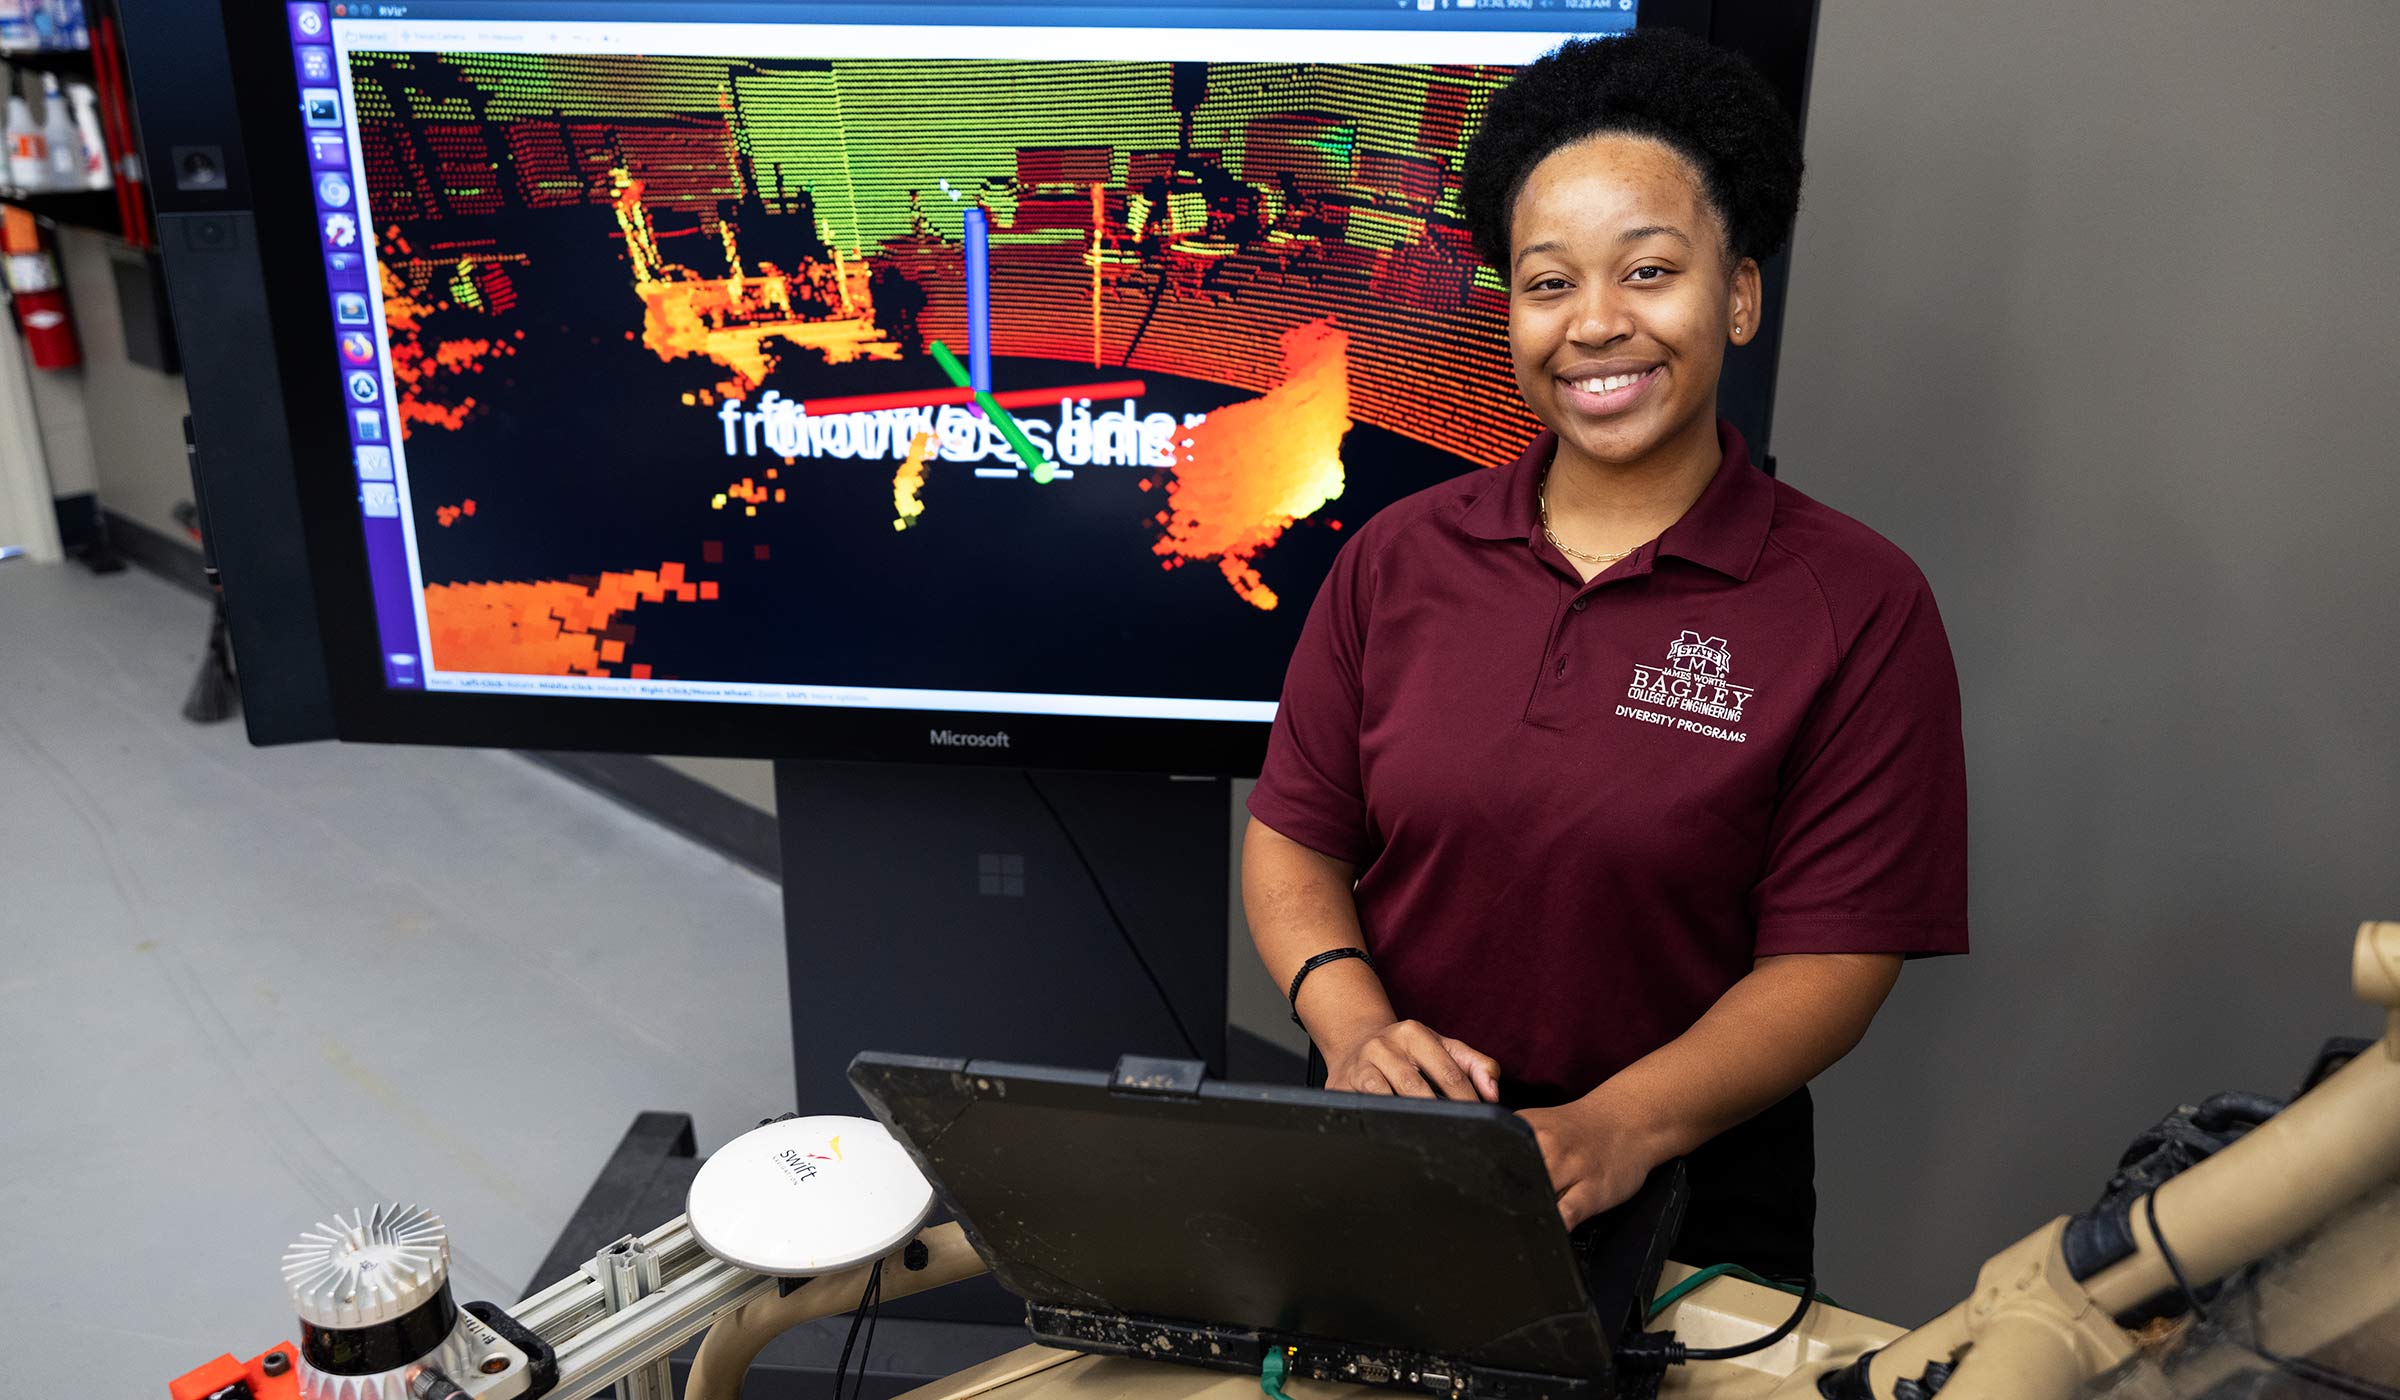 Kennedy Keyes, pictured in front of a screen with digital simulations